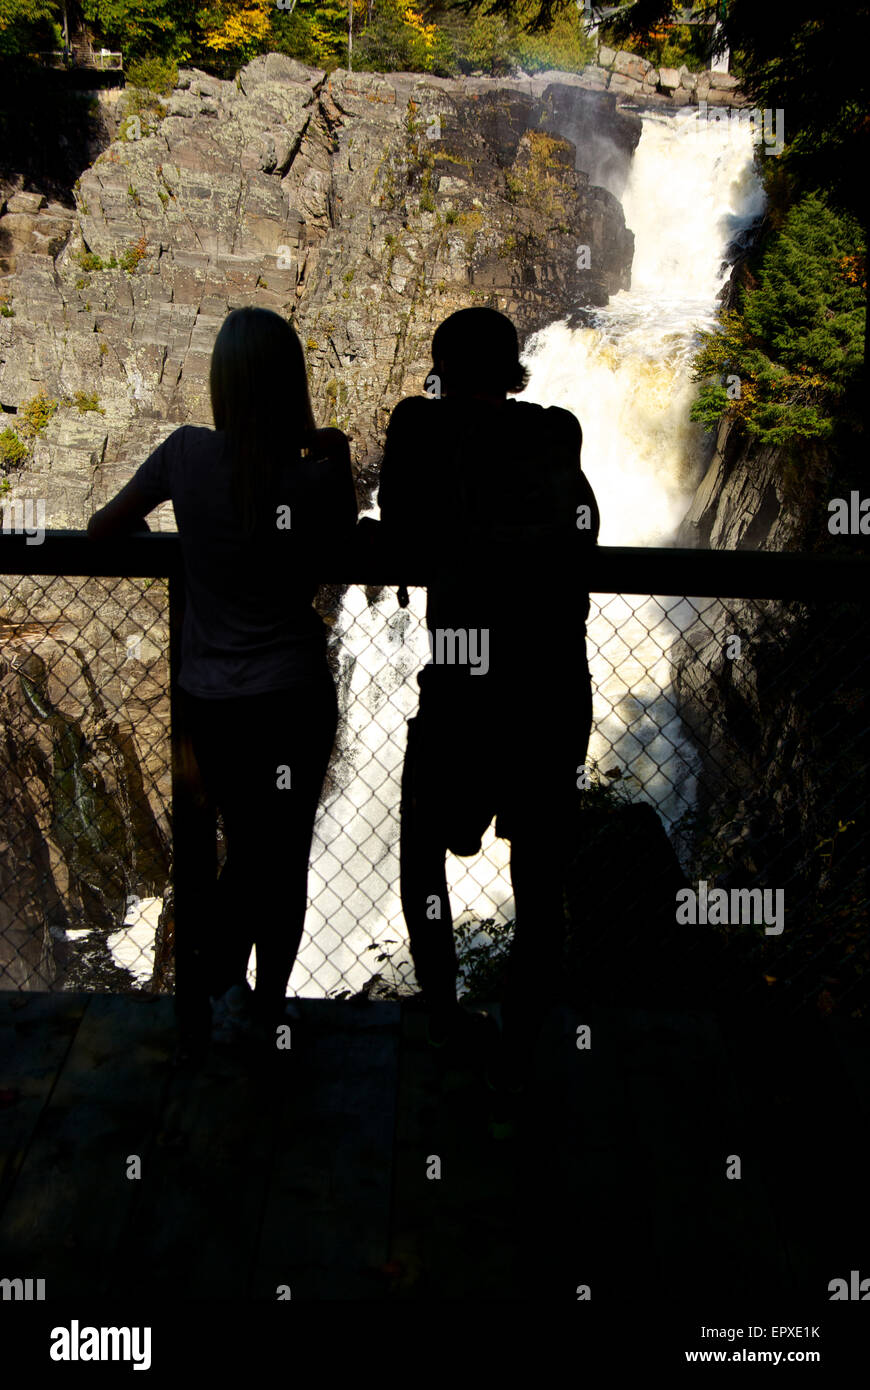 Couple in silhouette at viewpoint looking at raging torrent of water plunging down gorge Canyon Ste Anne River Park Stock Photo